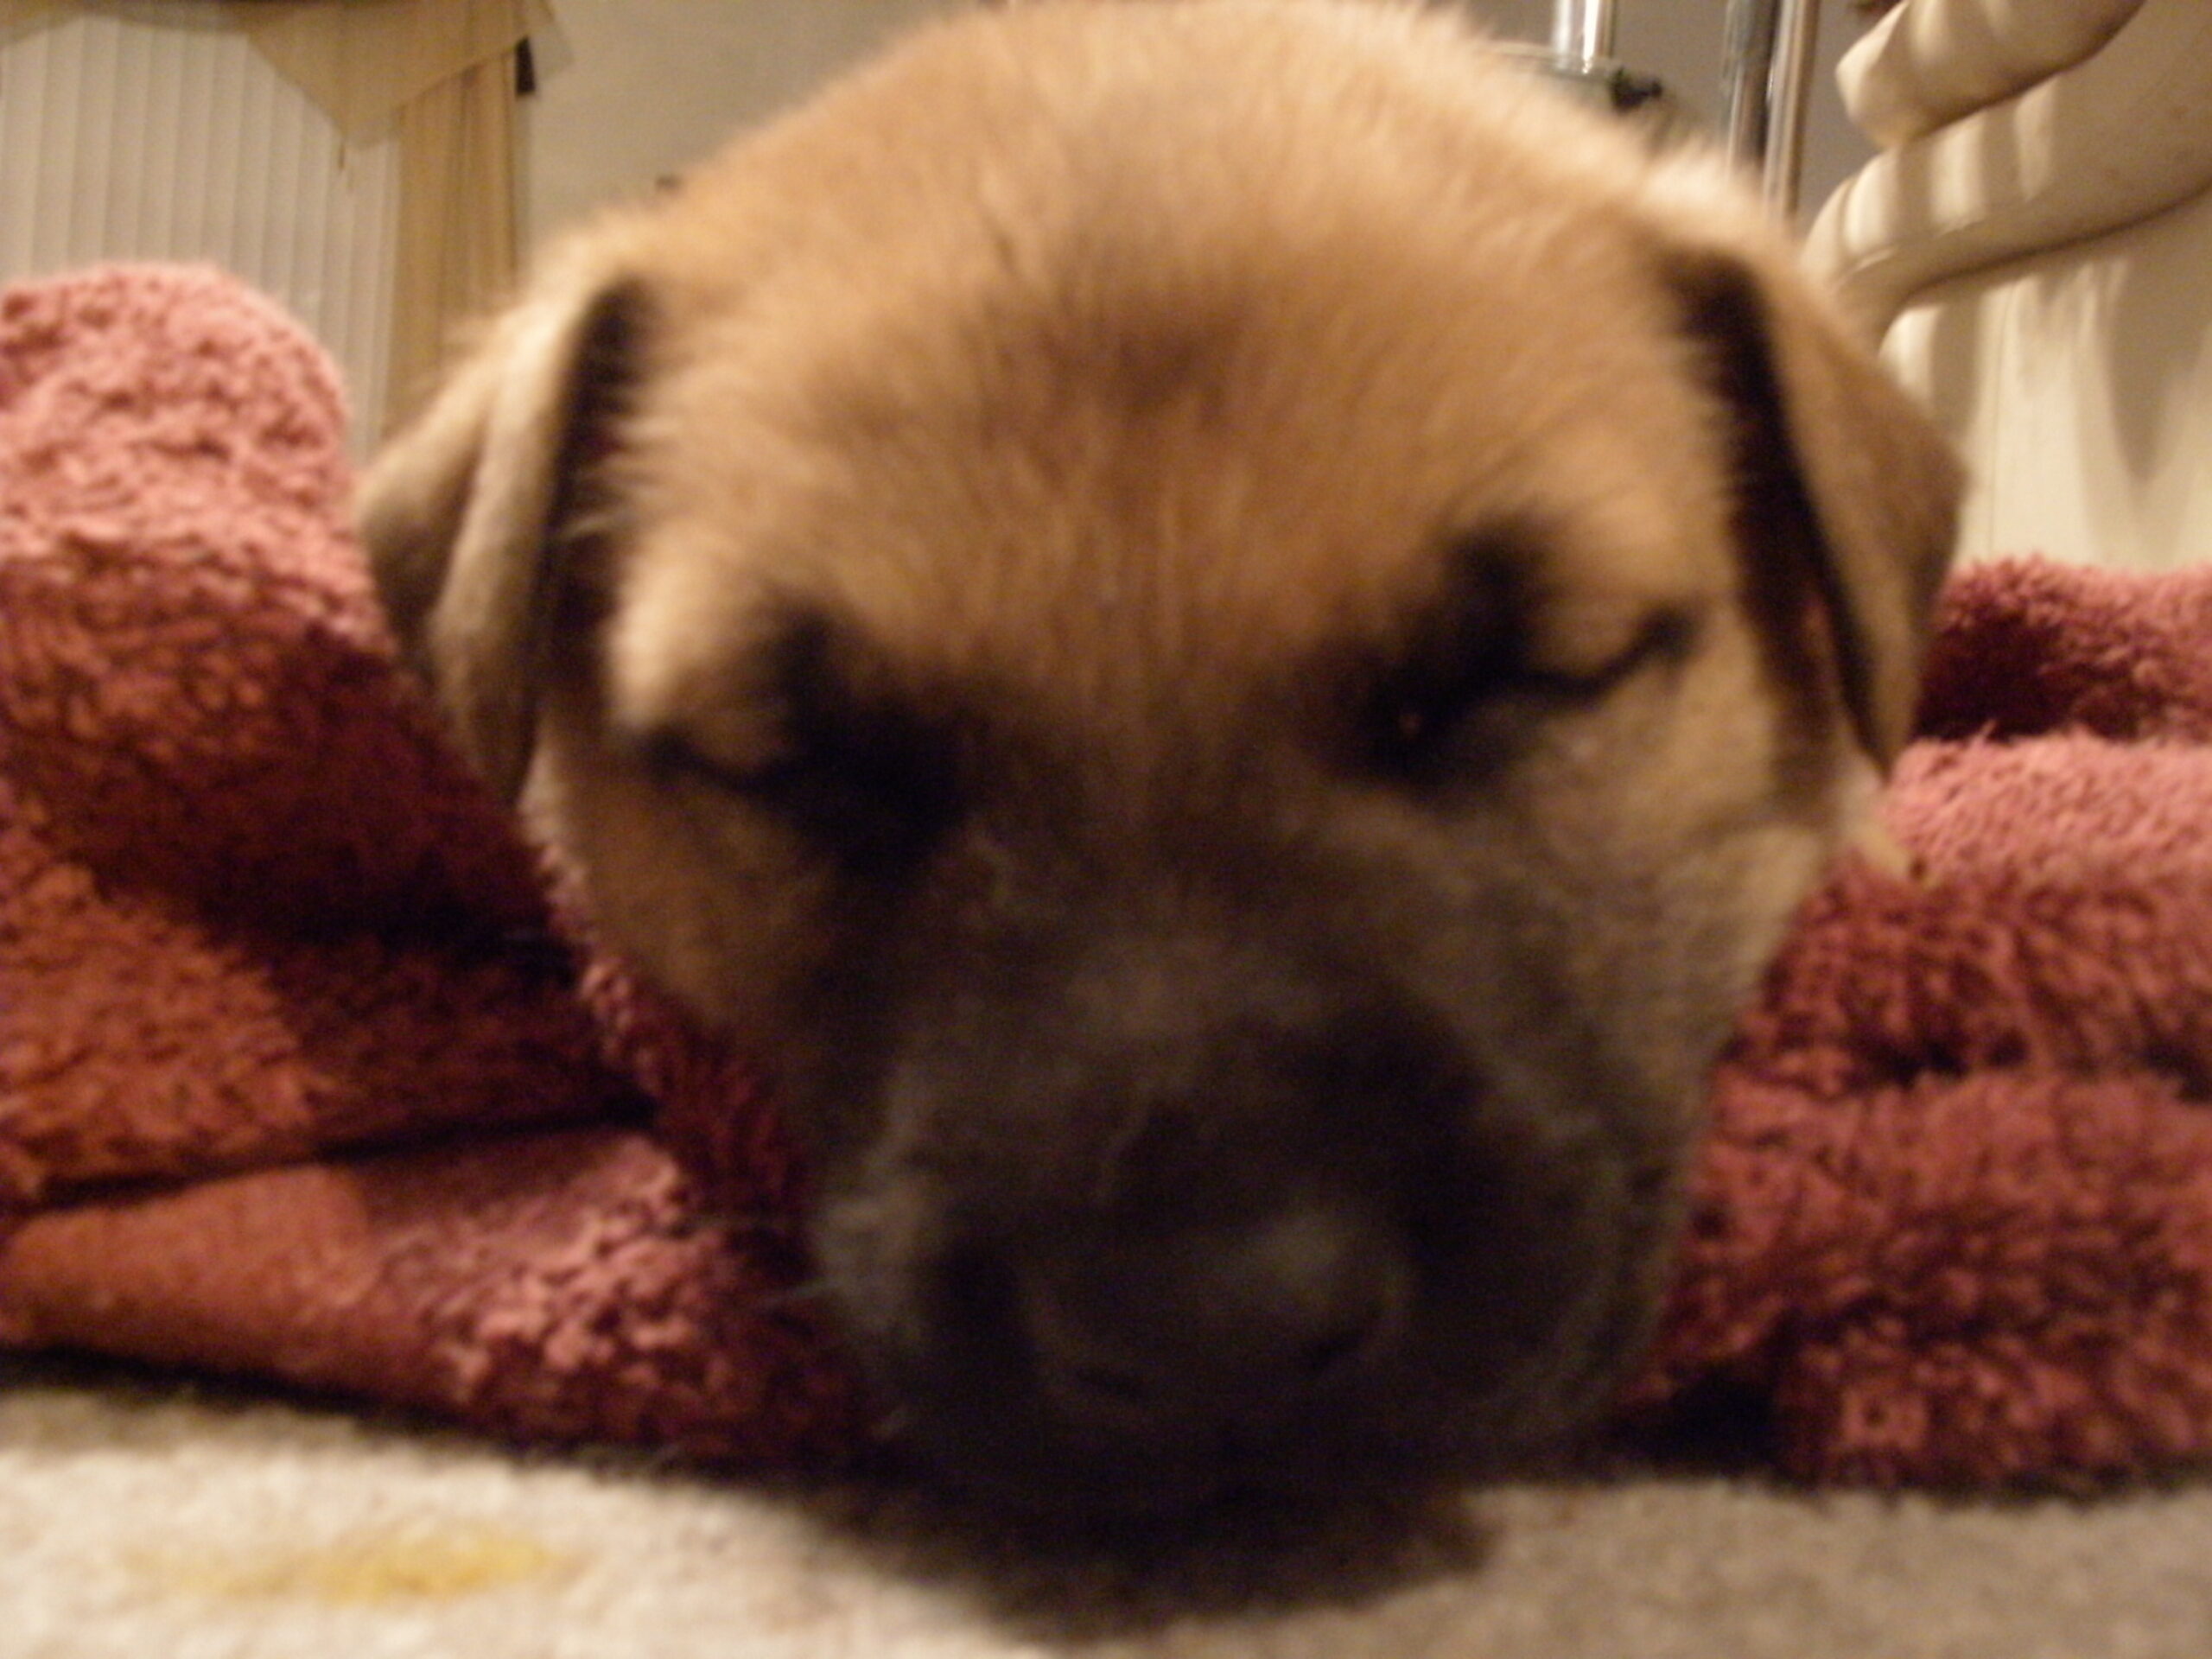 puppy asleep on a red towel pet urine